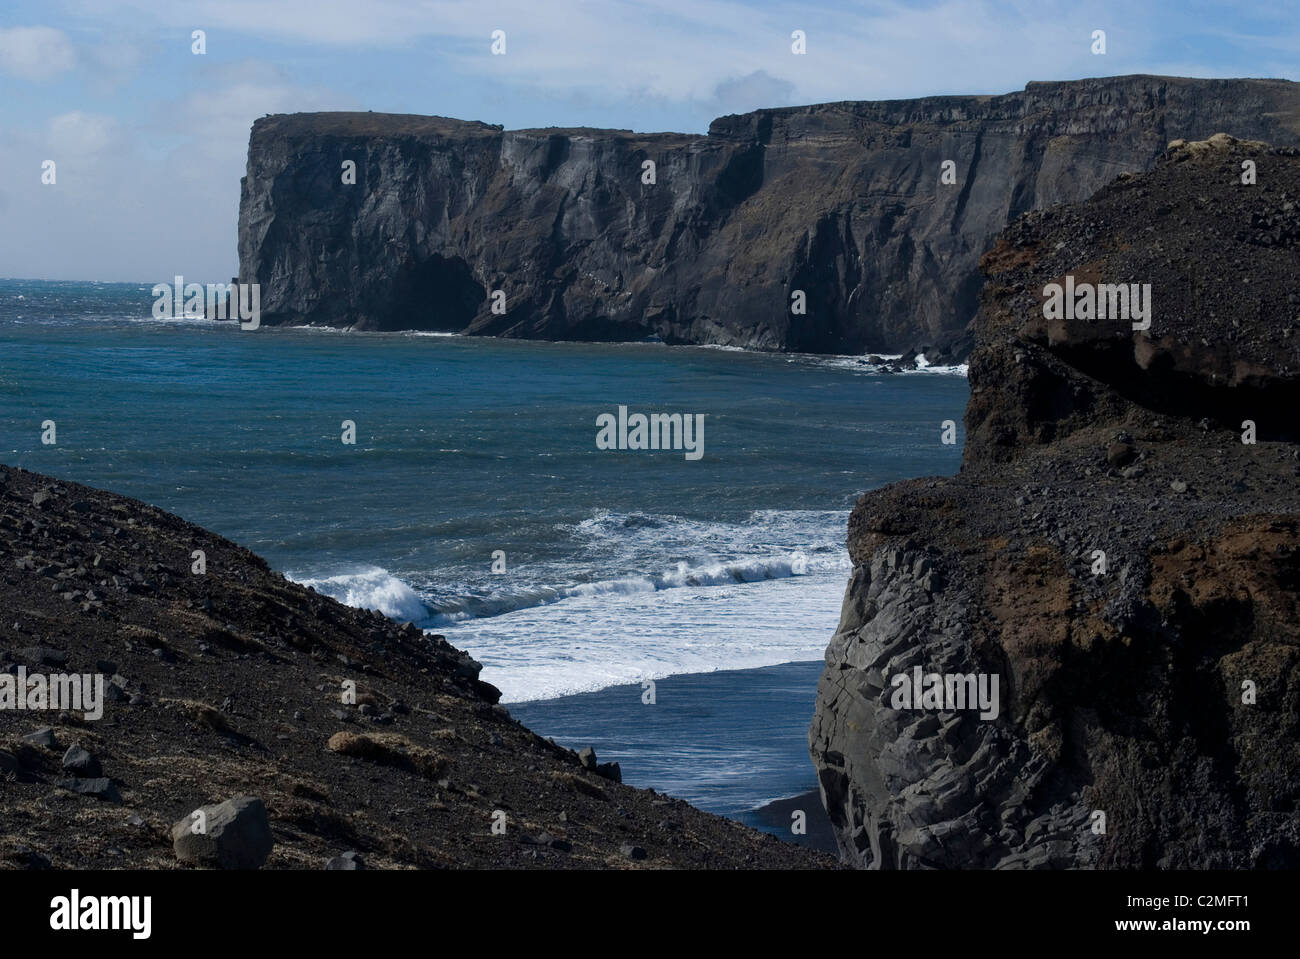 Dyrholaey cliff promontory and rock formations with black sand beach, Southern Iceland Stock Photo